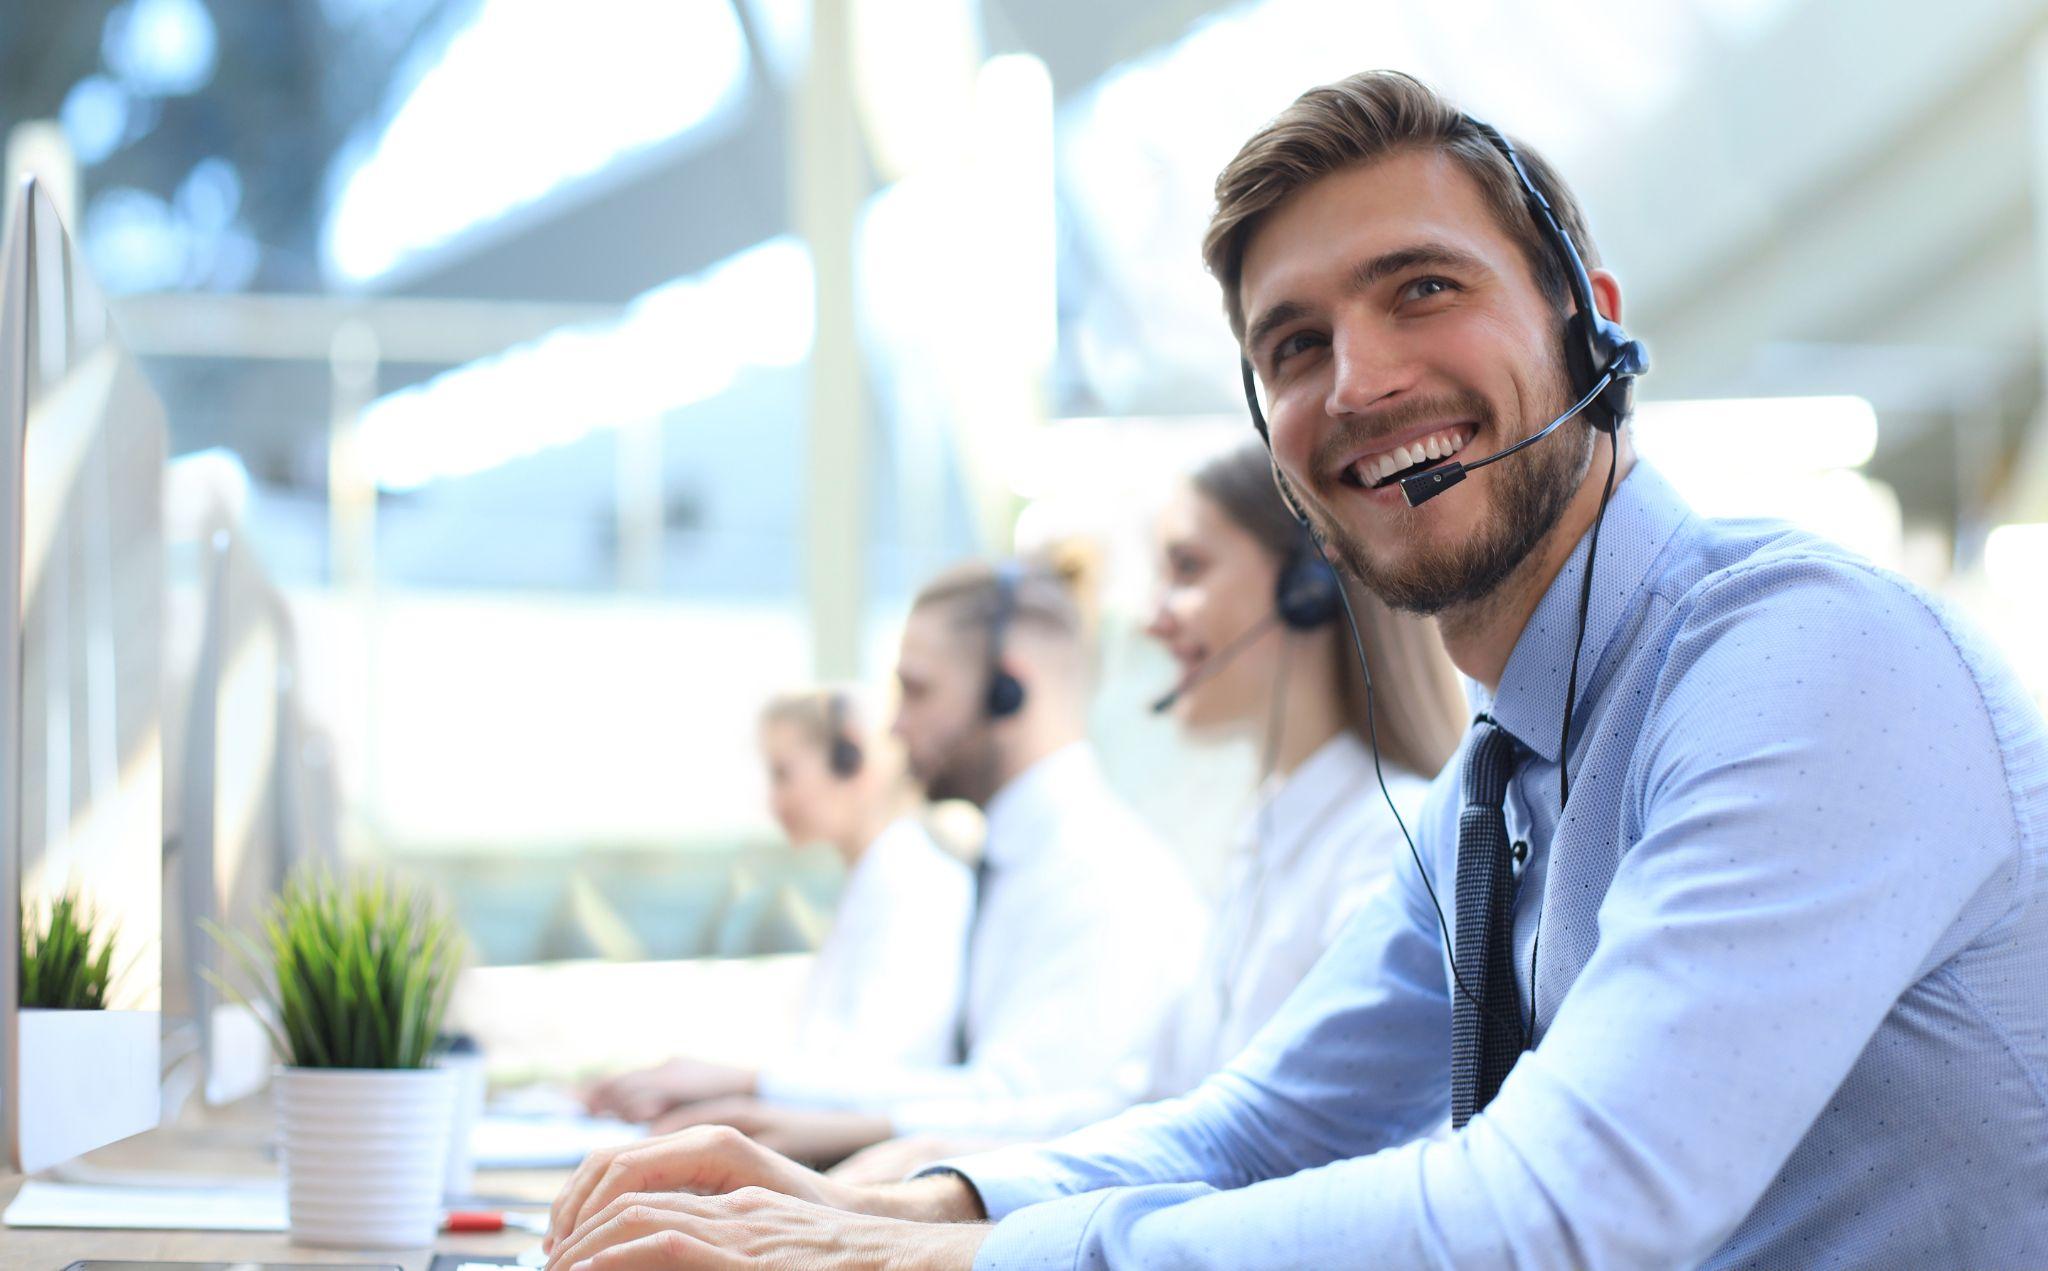 Smiling customer support operator at work